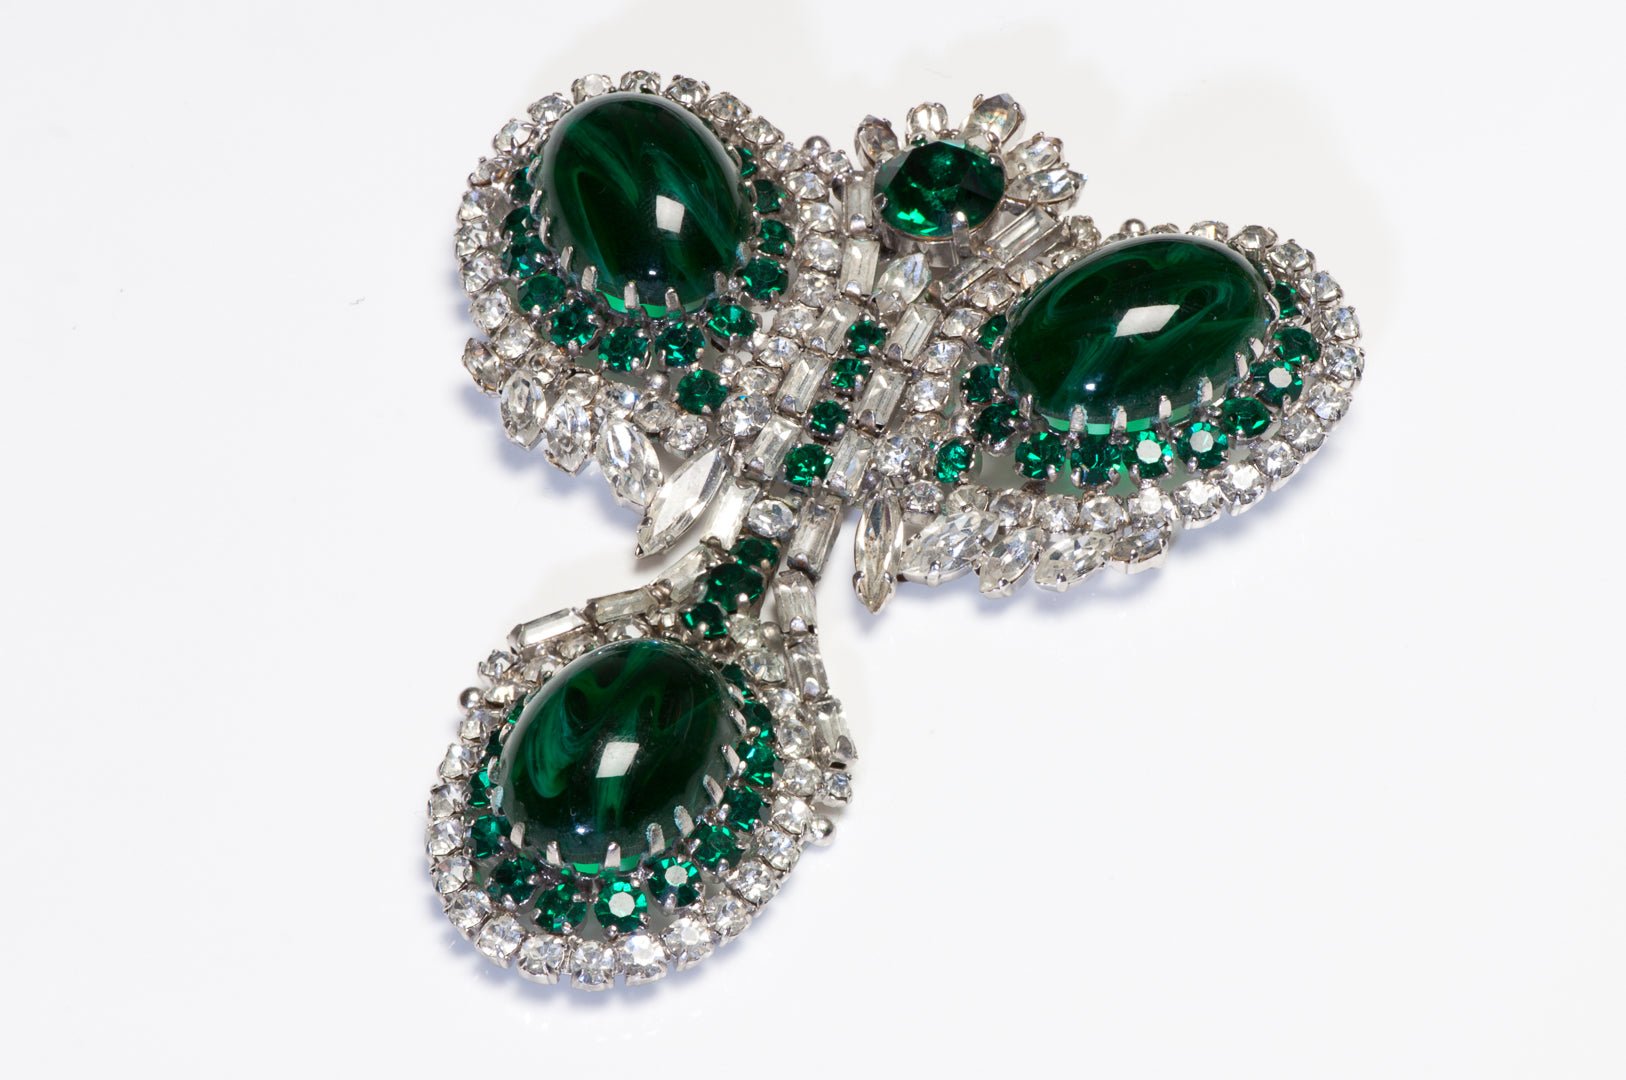 Vintage 1950’s Max Muller Kaufbeuren Couture Large Green Cabochon Crystal Brooch